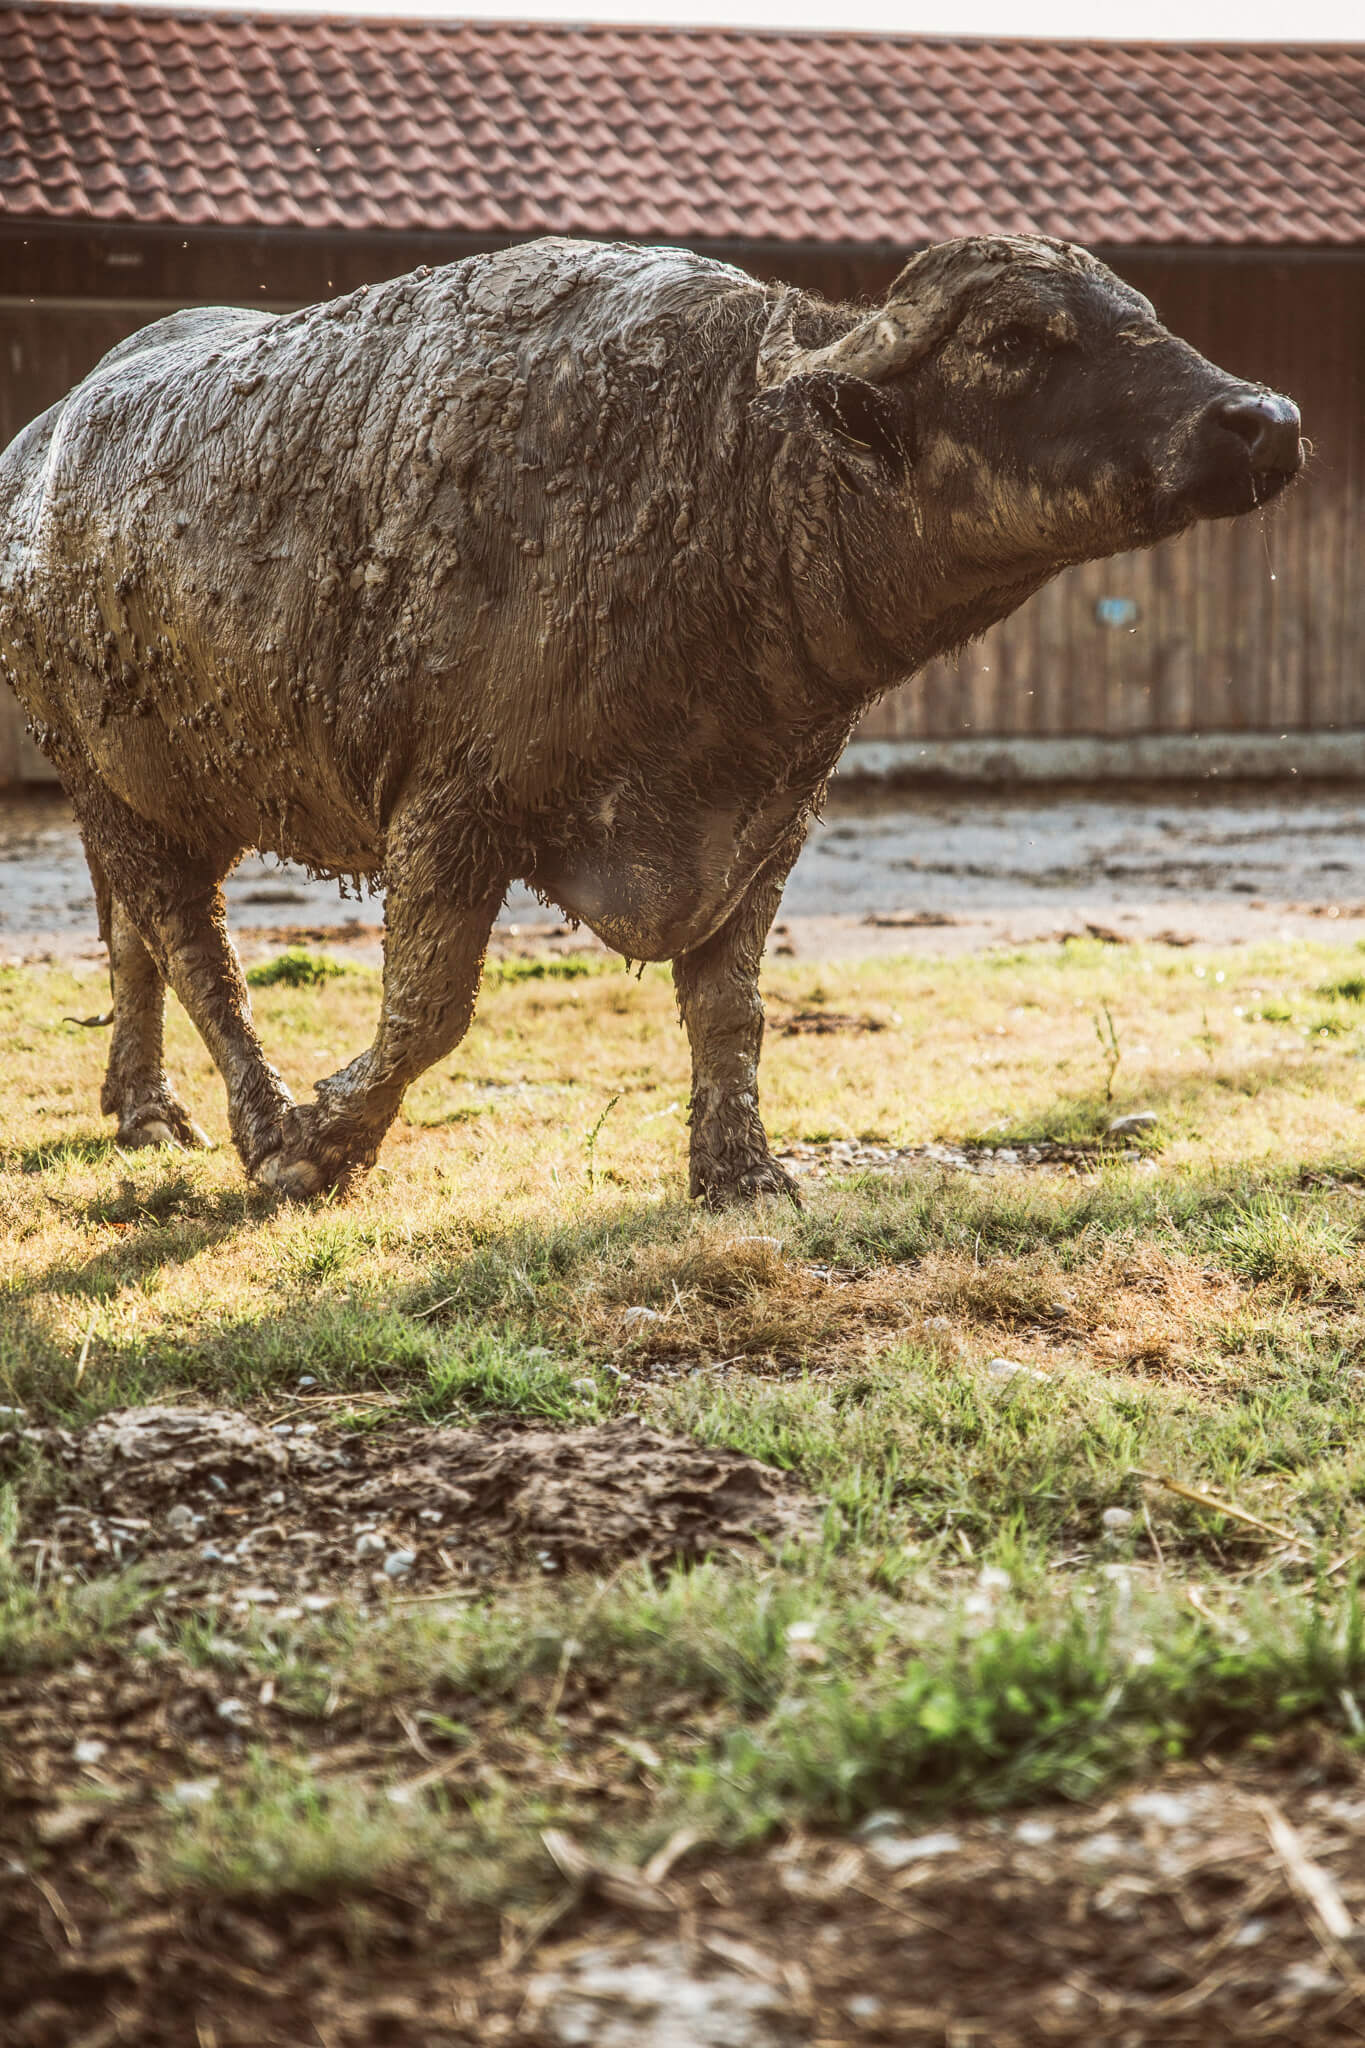 Water buffalo after mud bath - at the buffalo farm the animals are bred and utilized themselves